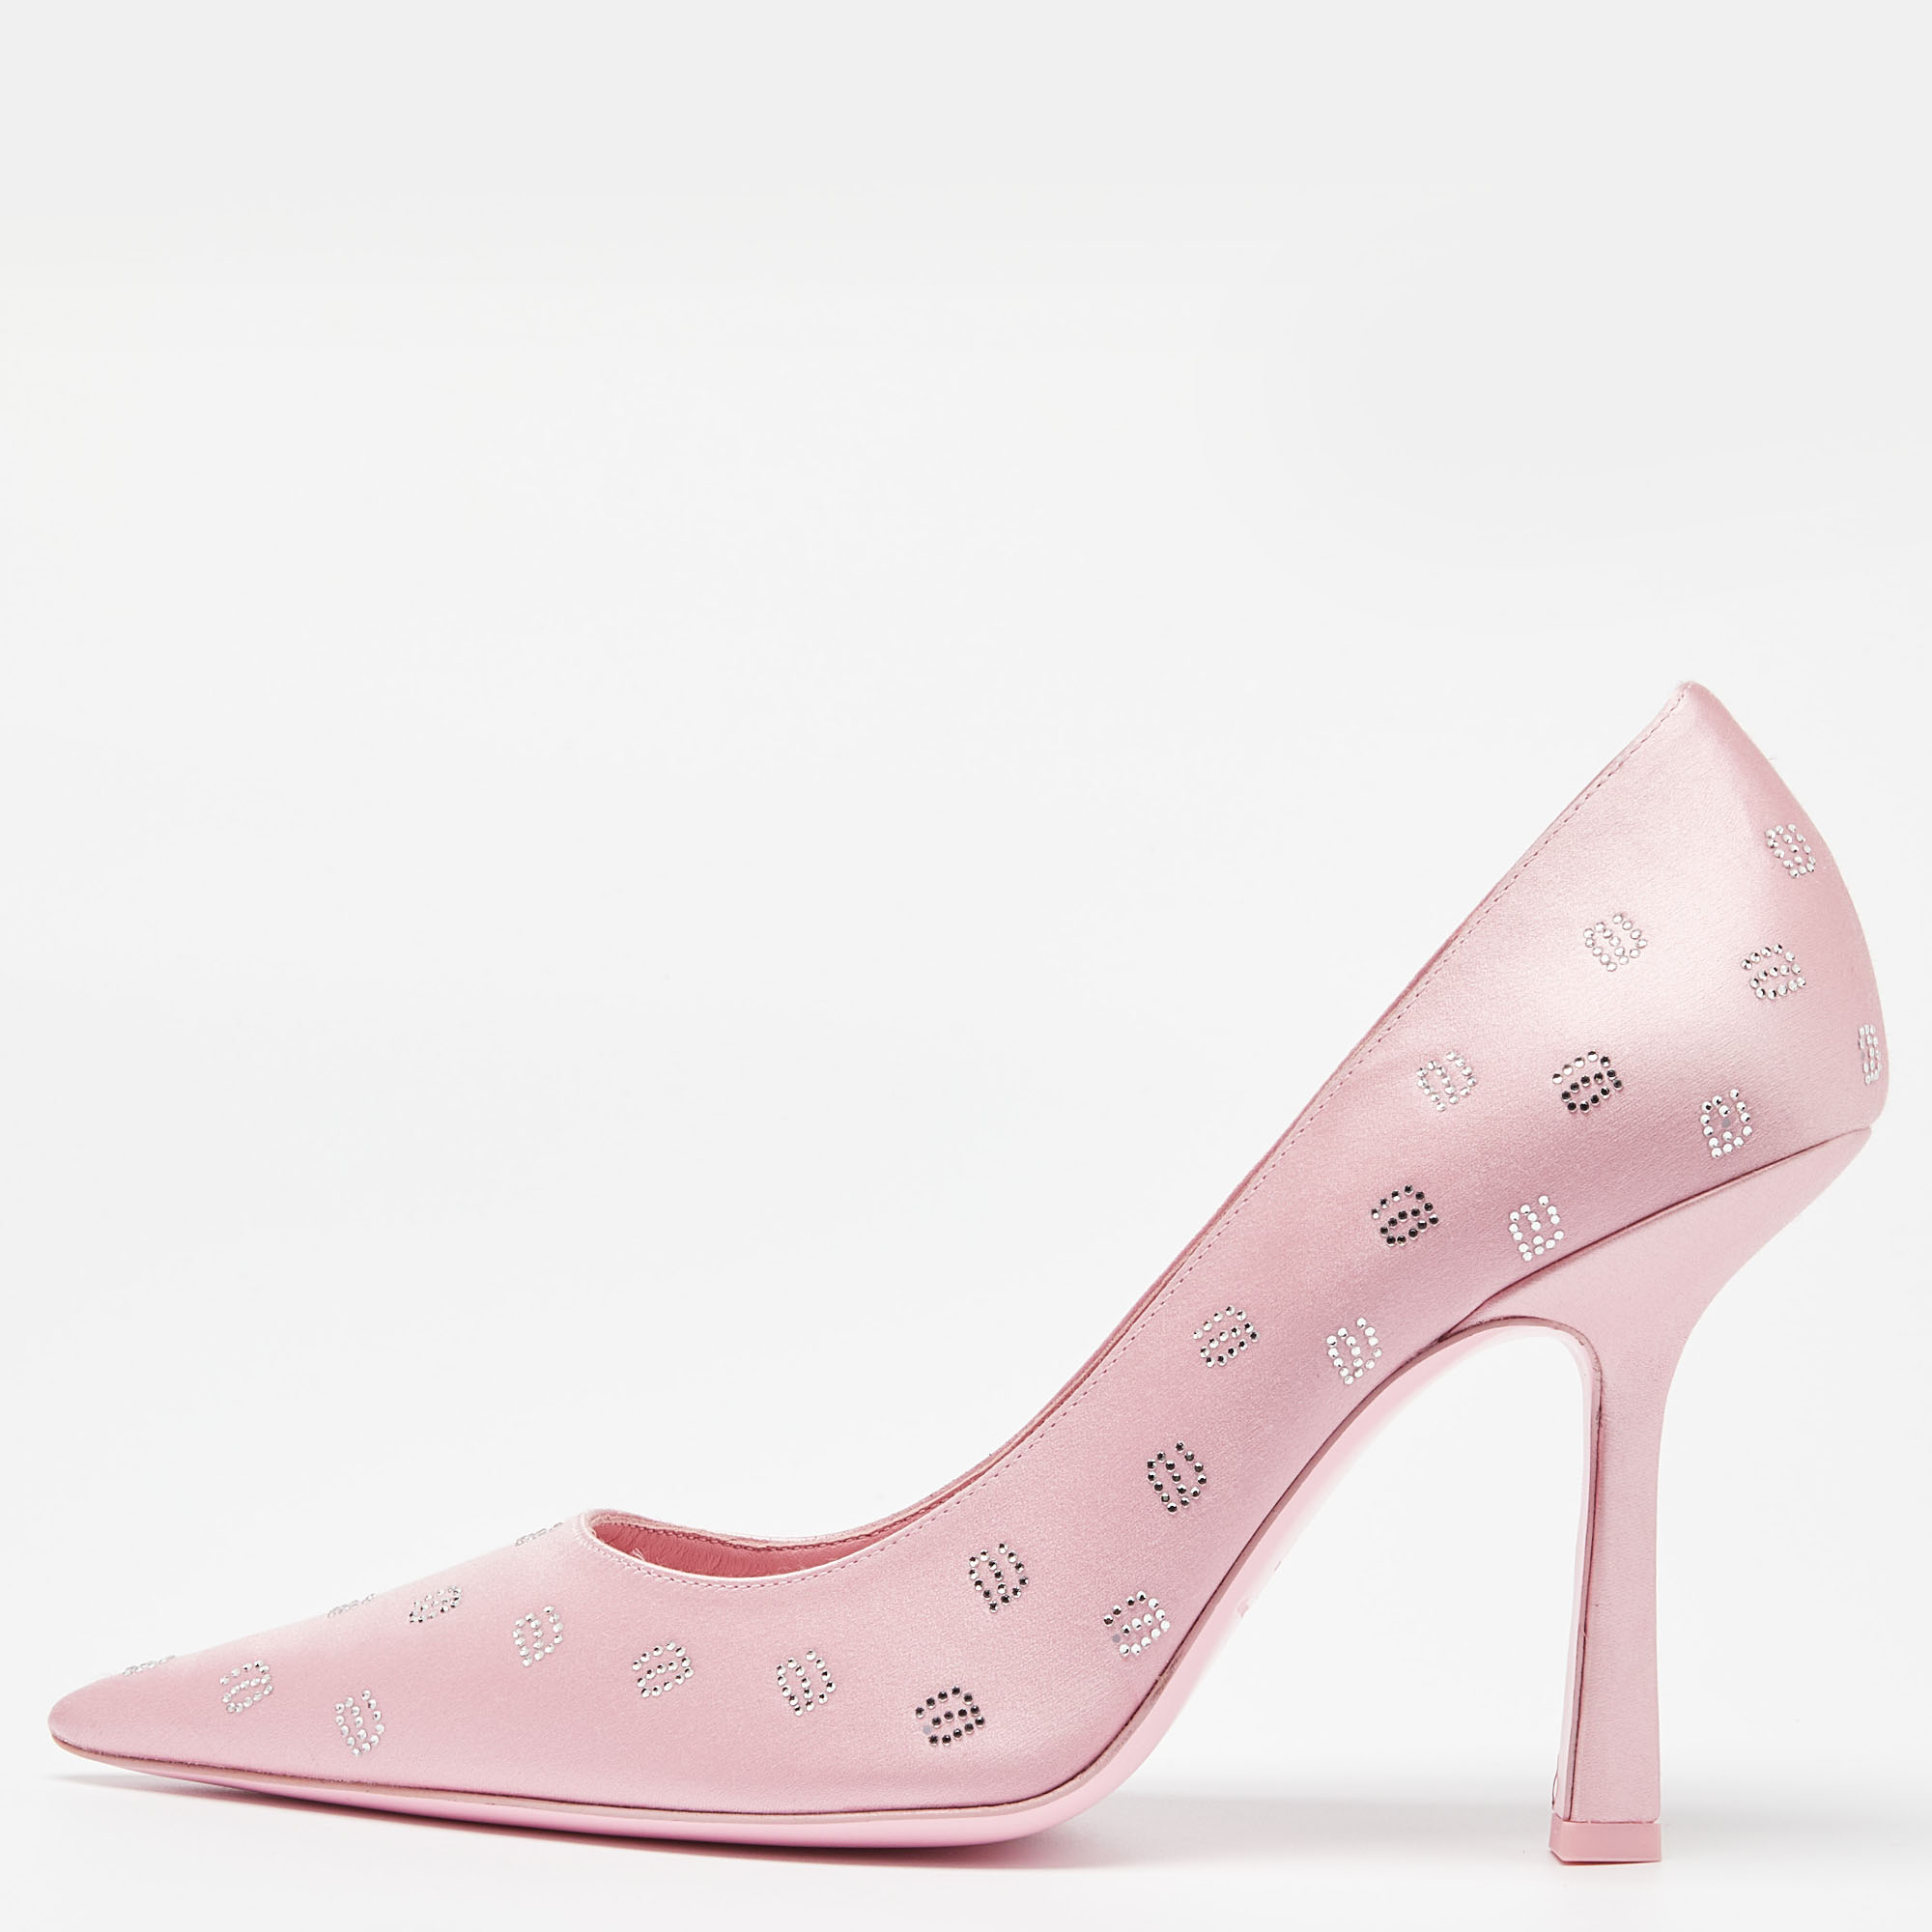 

Alexander Wang Satin Delphine 105 Pointed Toe Pumps Size, Pink